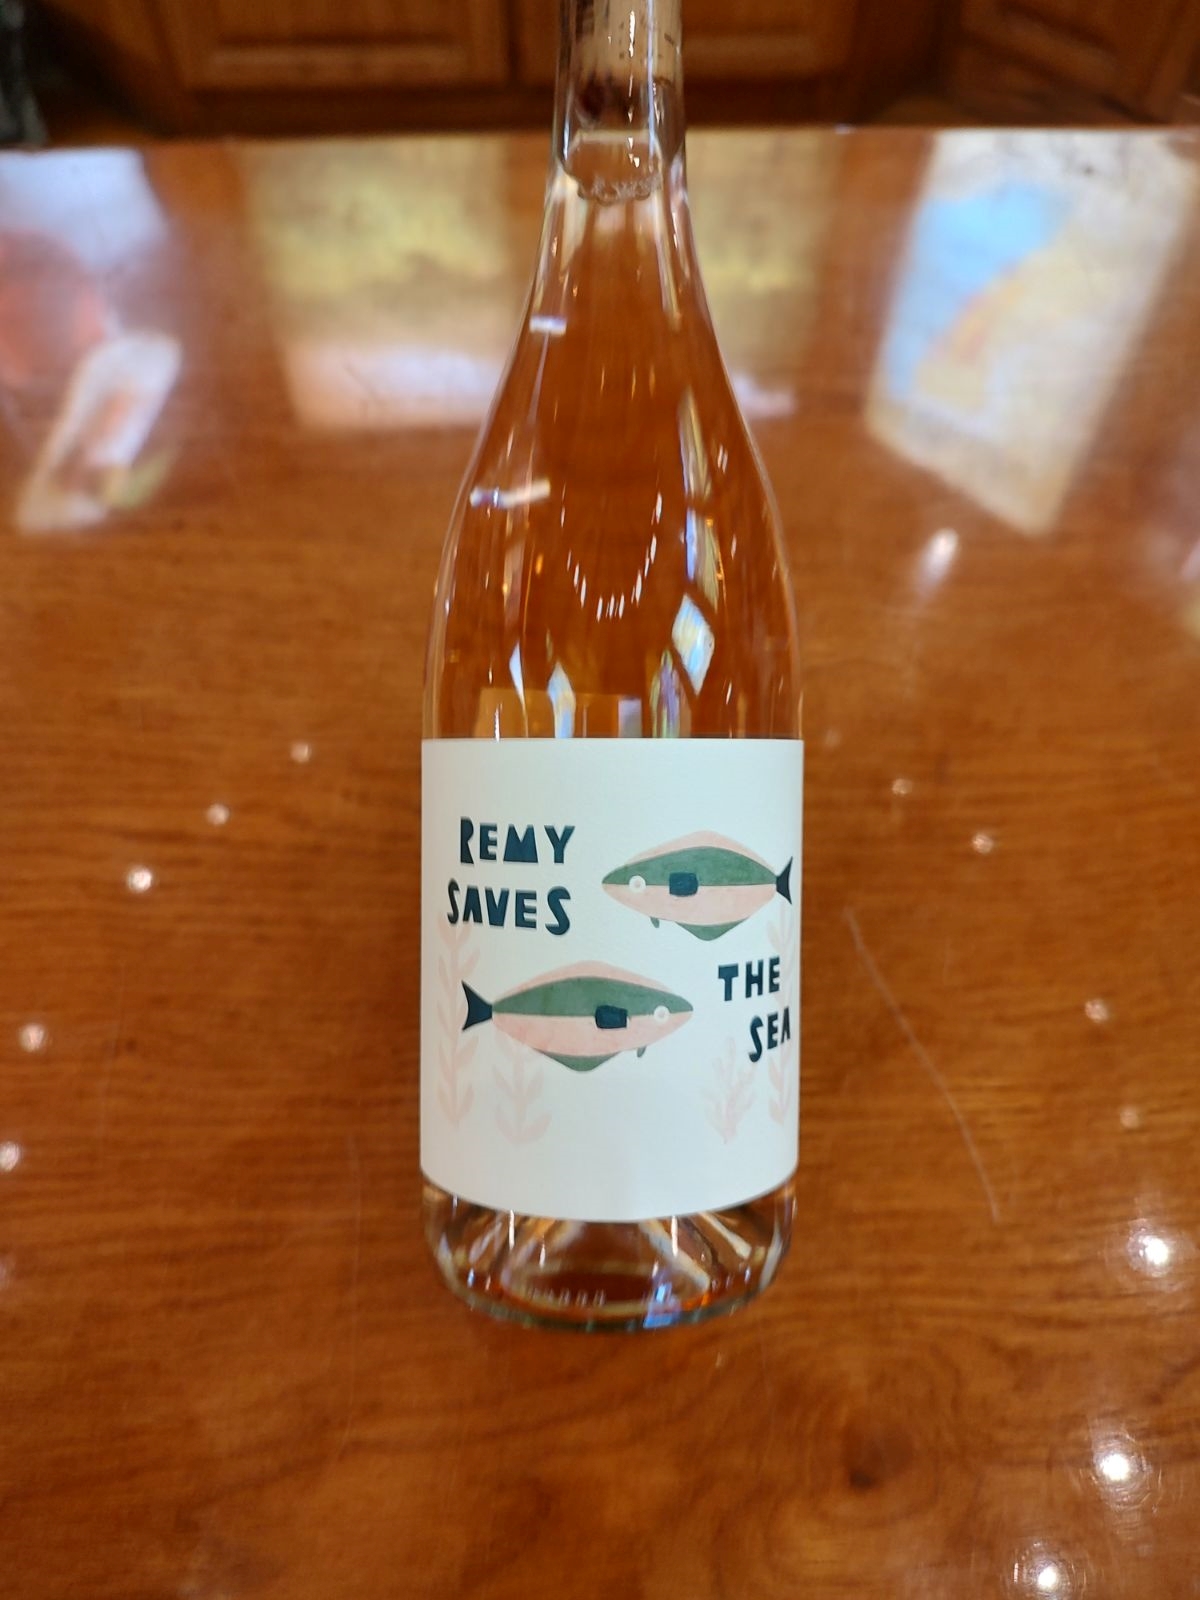 A bottle of Remy Saves the Sea rosé sits on a table